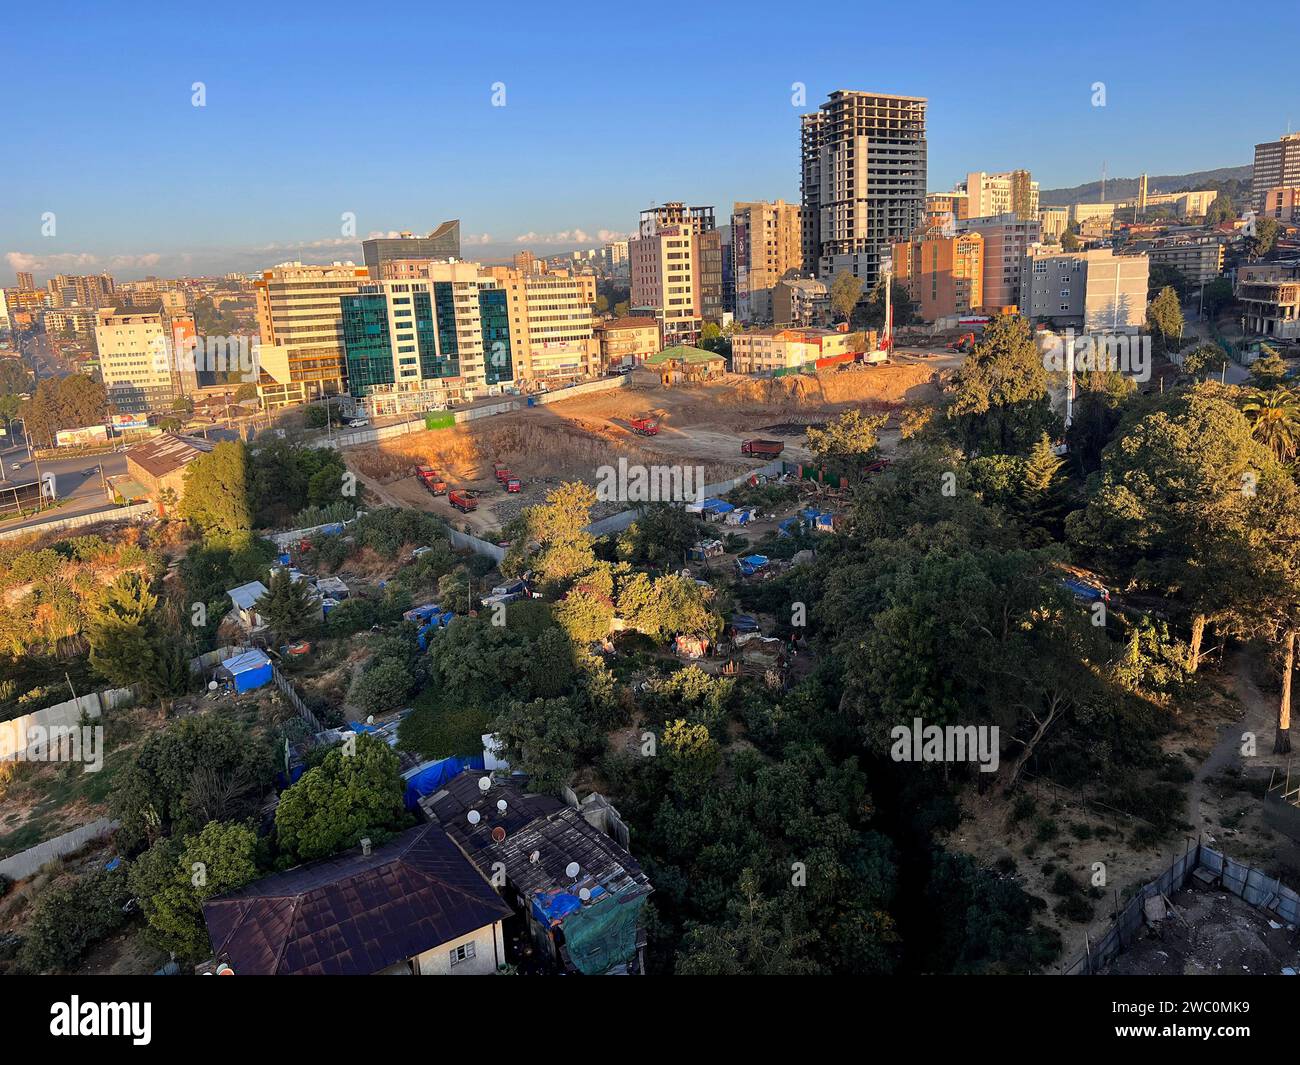 Addis Abeba, Ethiopia - January 9 2023: Aerial overview of Addis Abeba city, the capital of Ethiopia, showing brand new buildings and construction sit Stock Photo